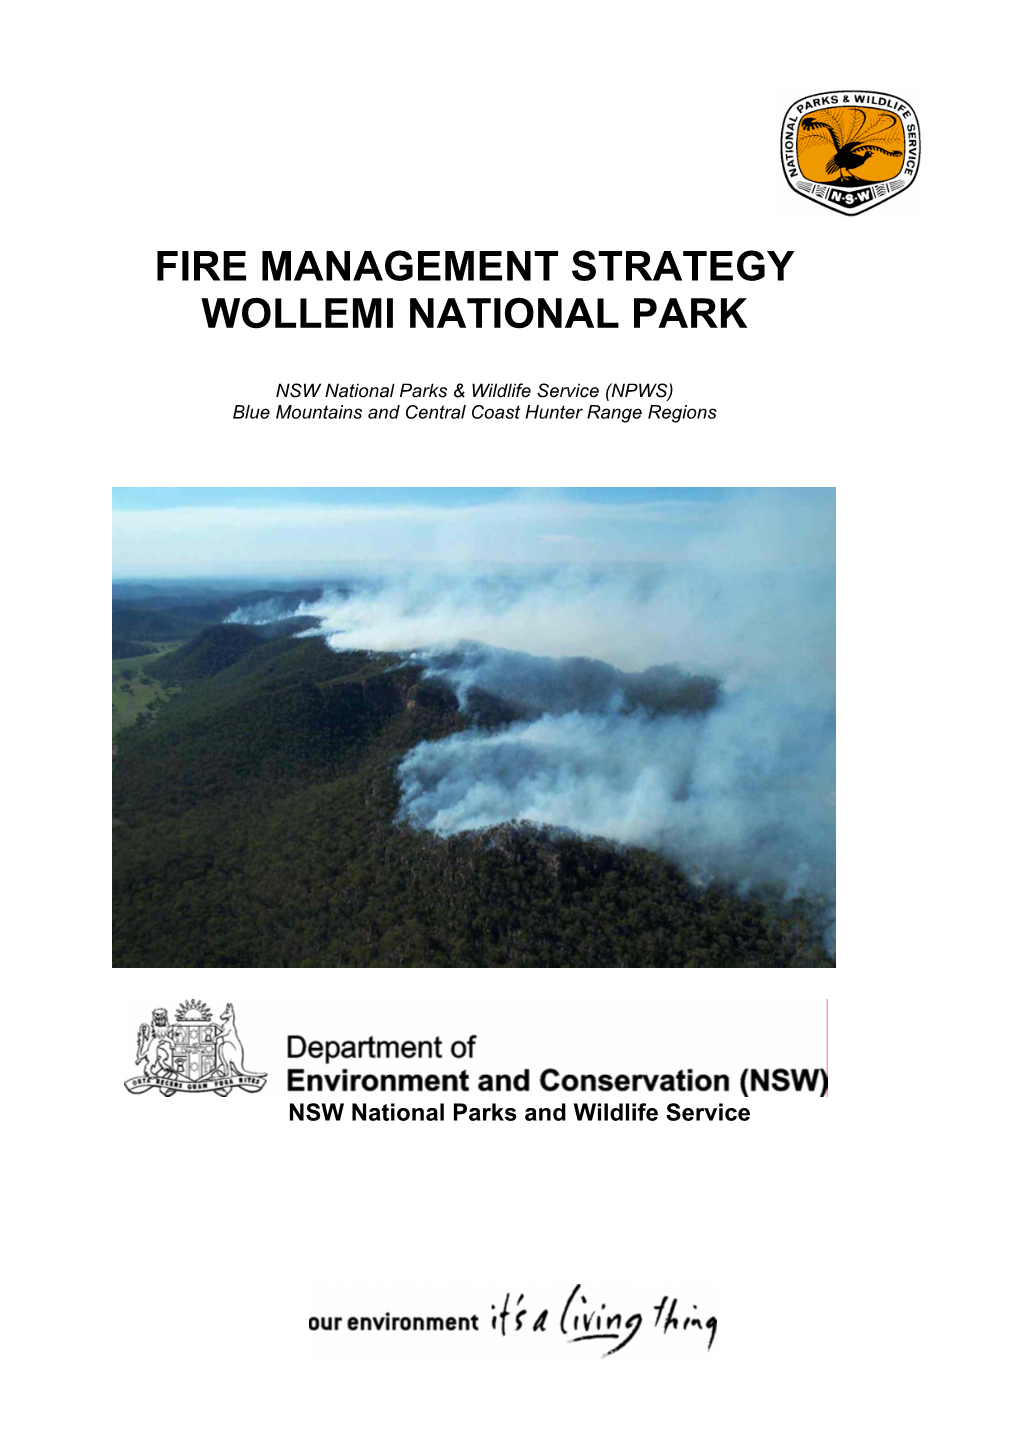 Wollemi National Park Fire Management Strategy